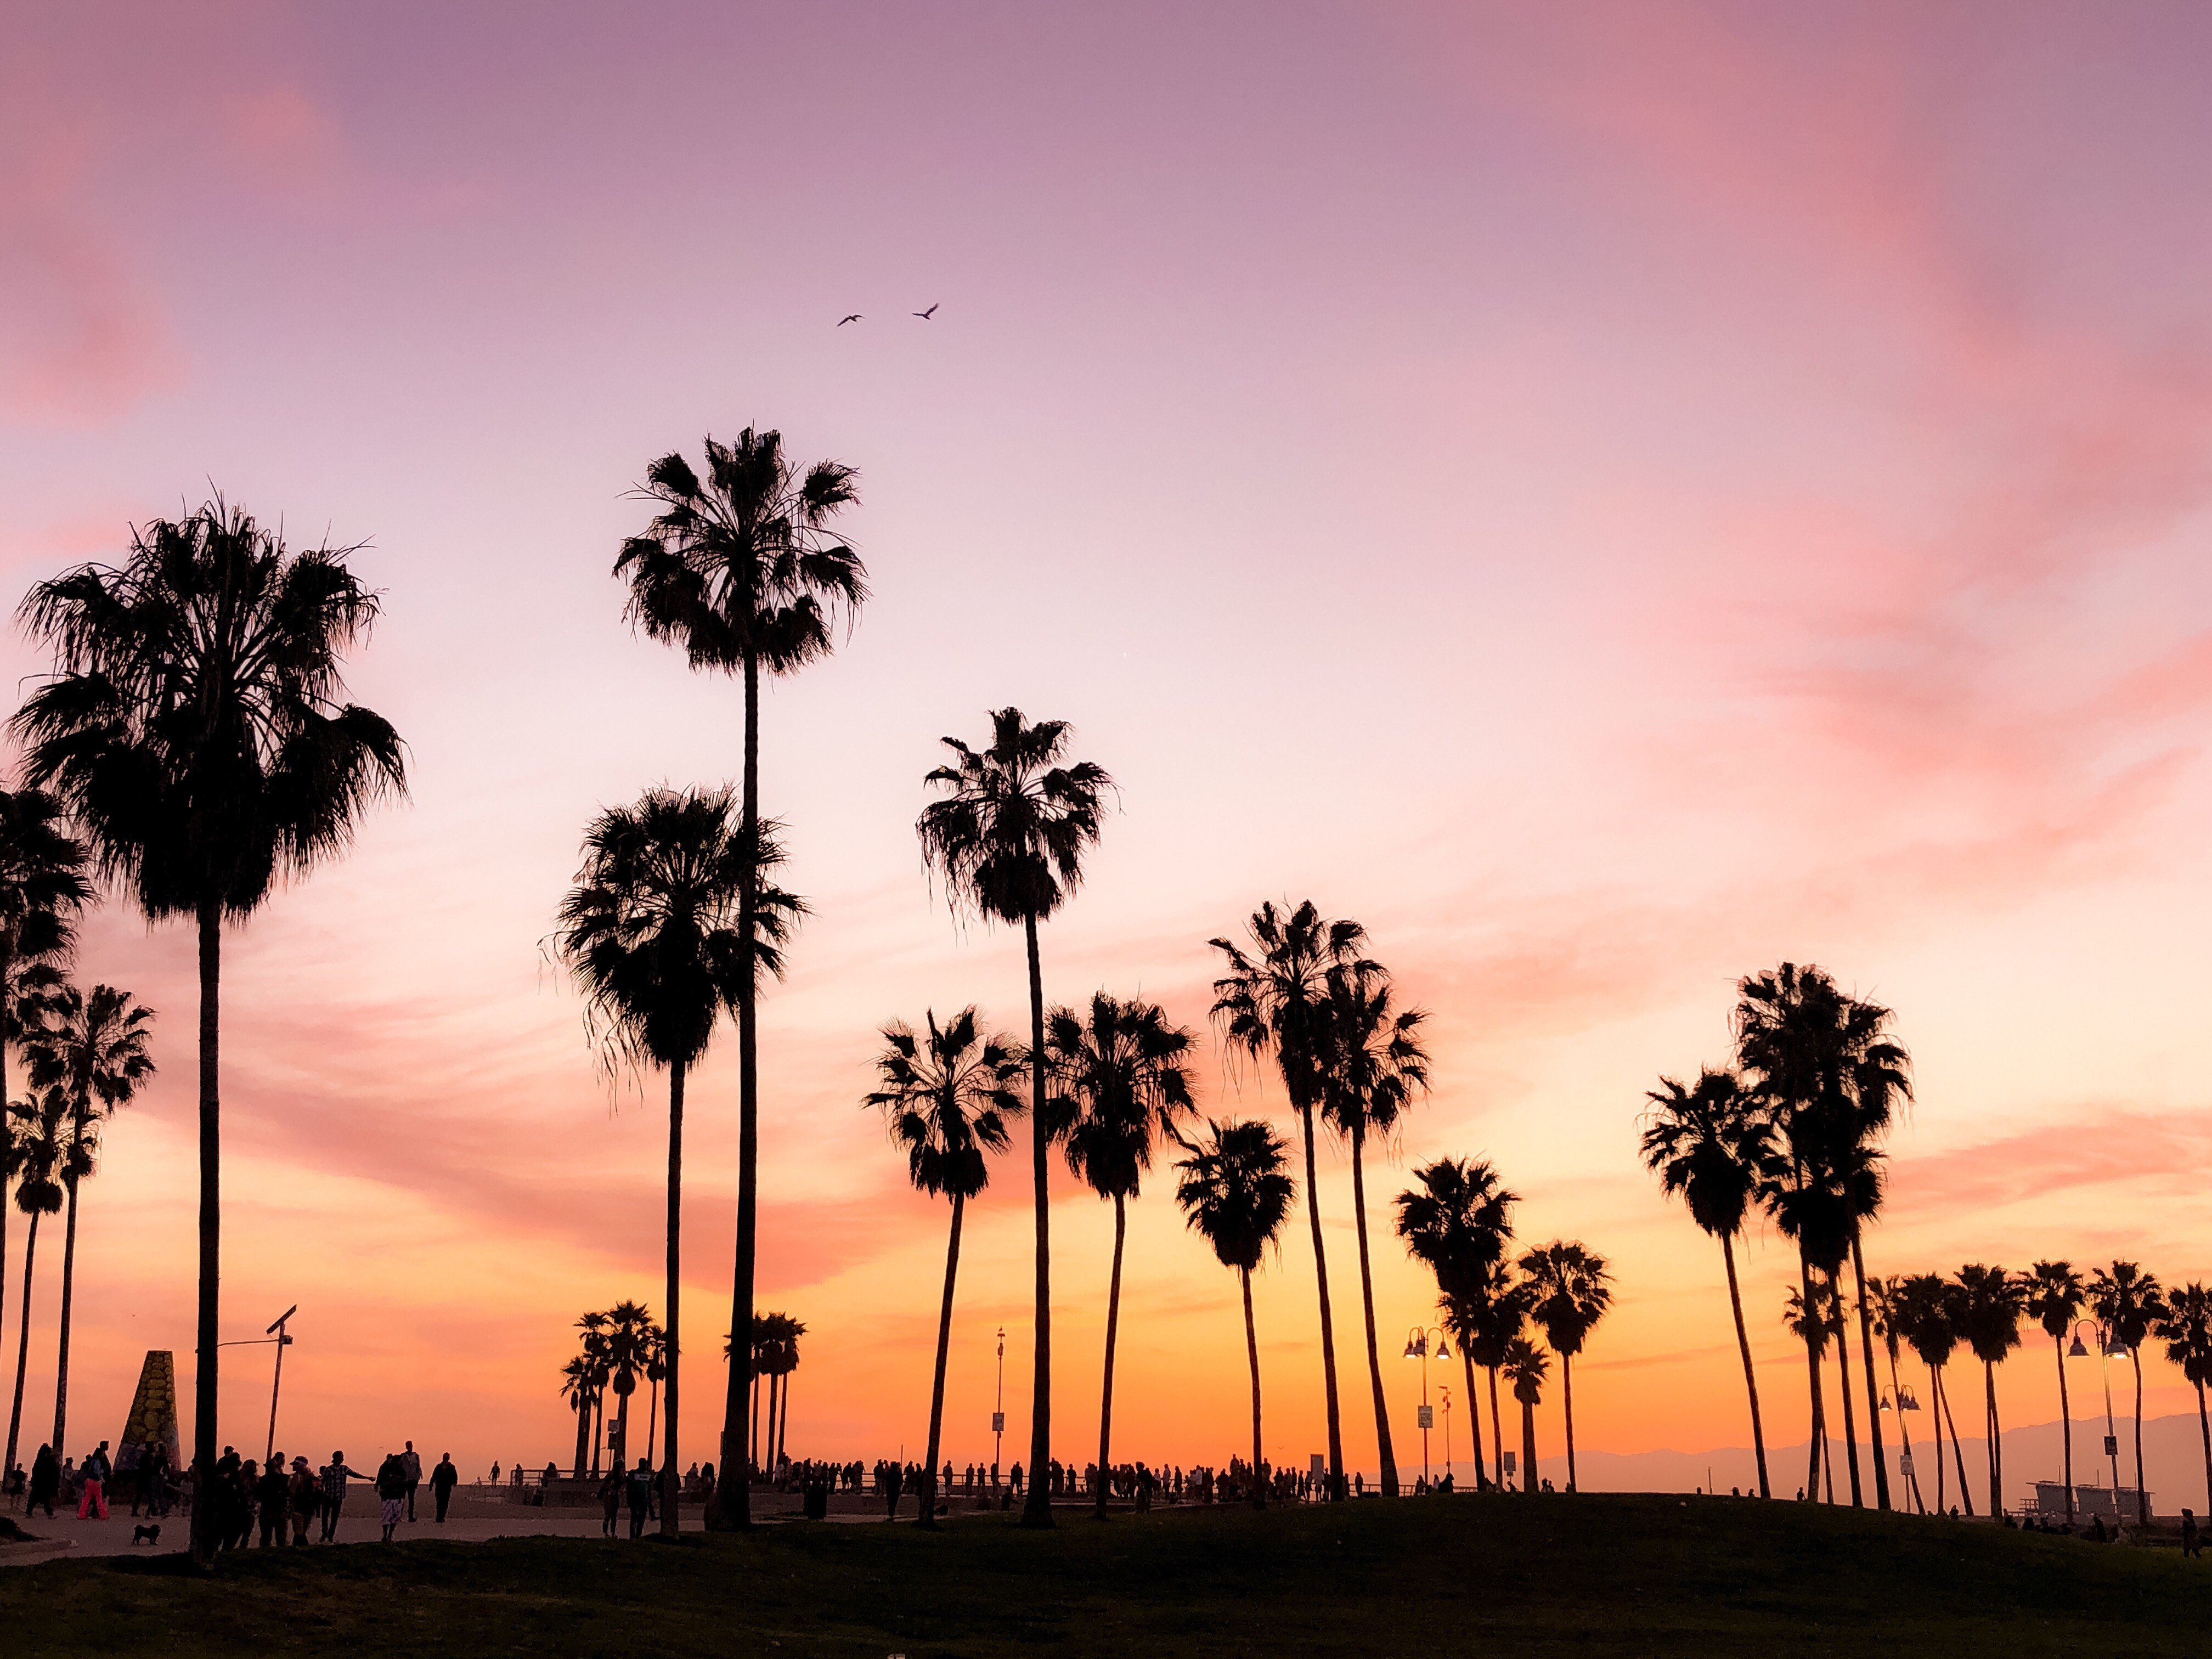 California is a state with some of the most welcoming West Coast locations to settle in